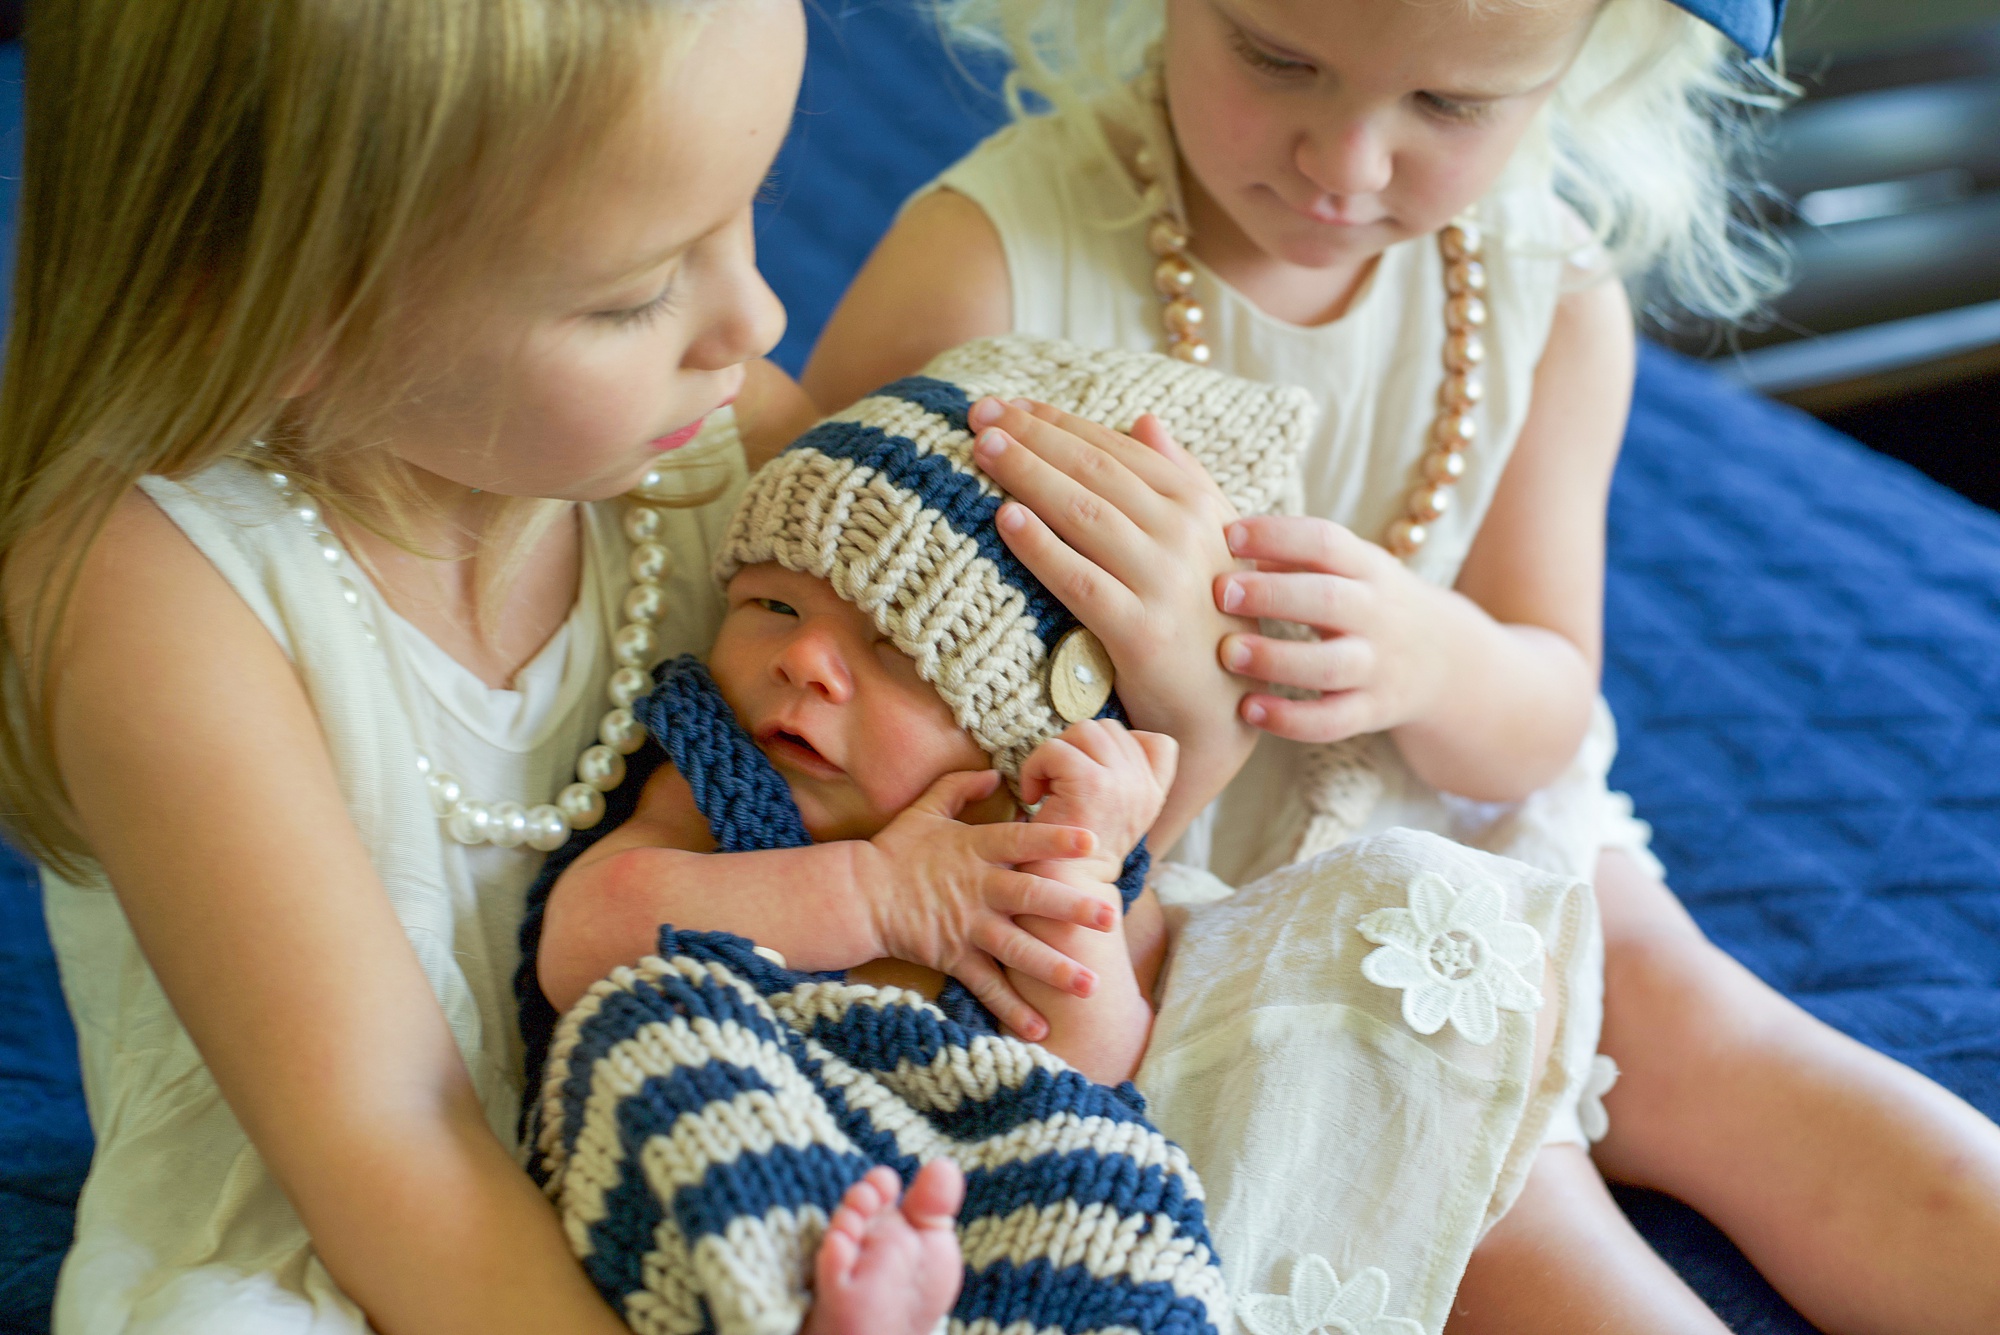 Little Elm Lifestyle Newborn Session with baby in blue and white knit outfit